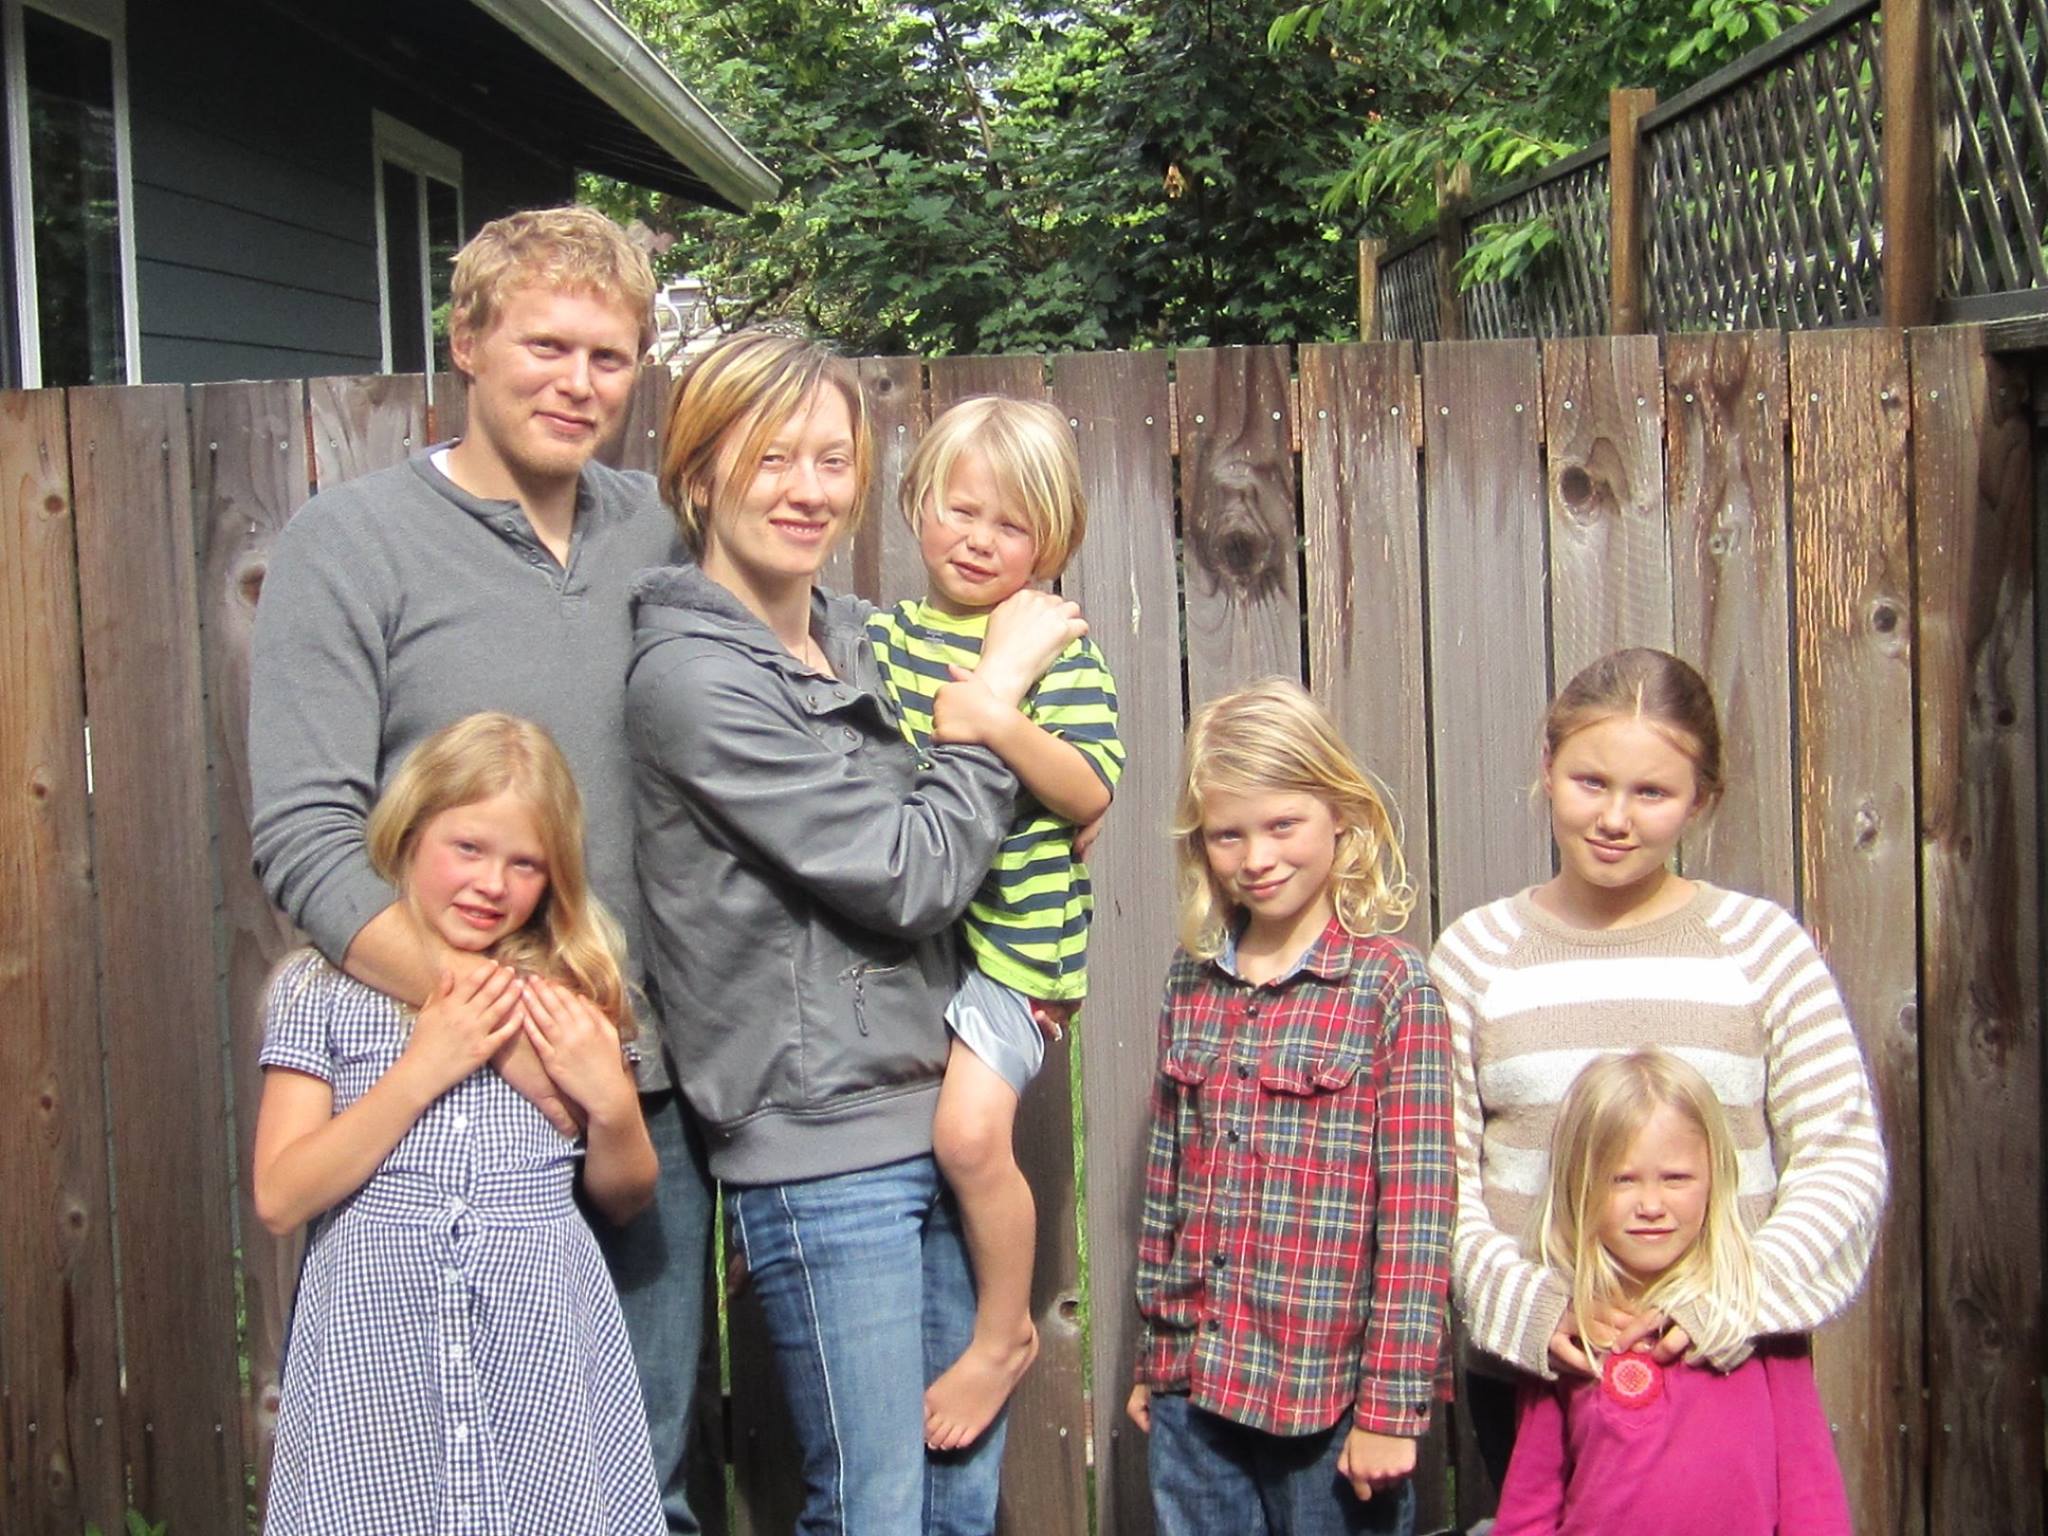 A husband and wife stand in front of a fence along with their five children.